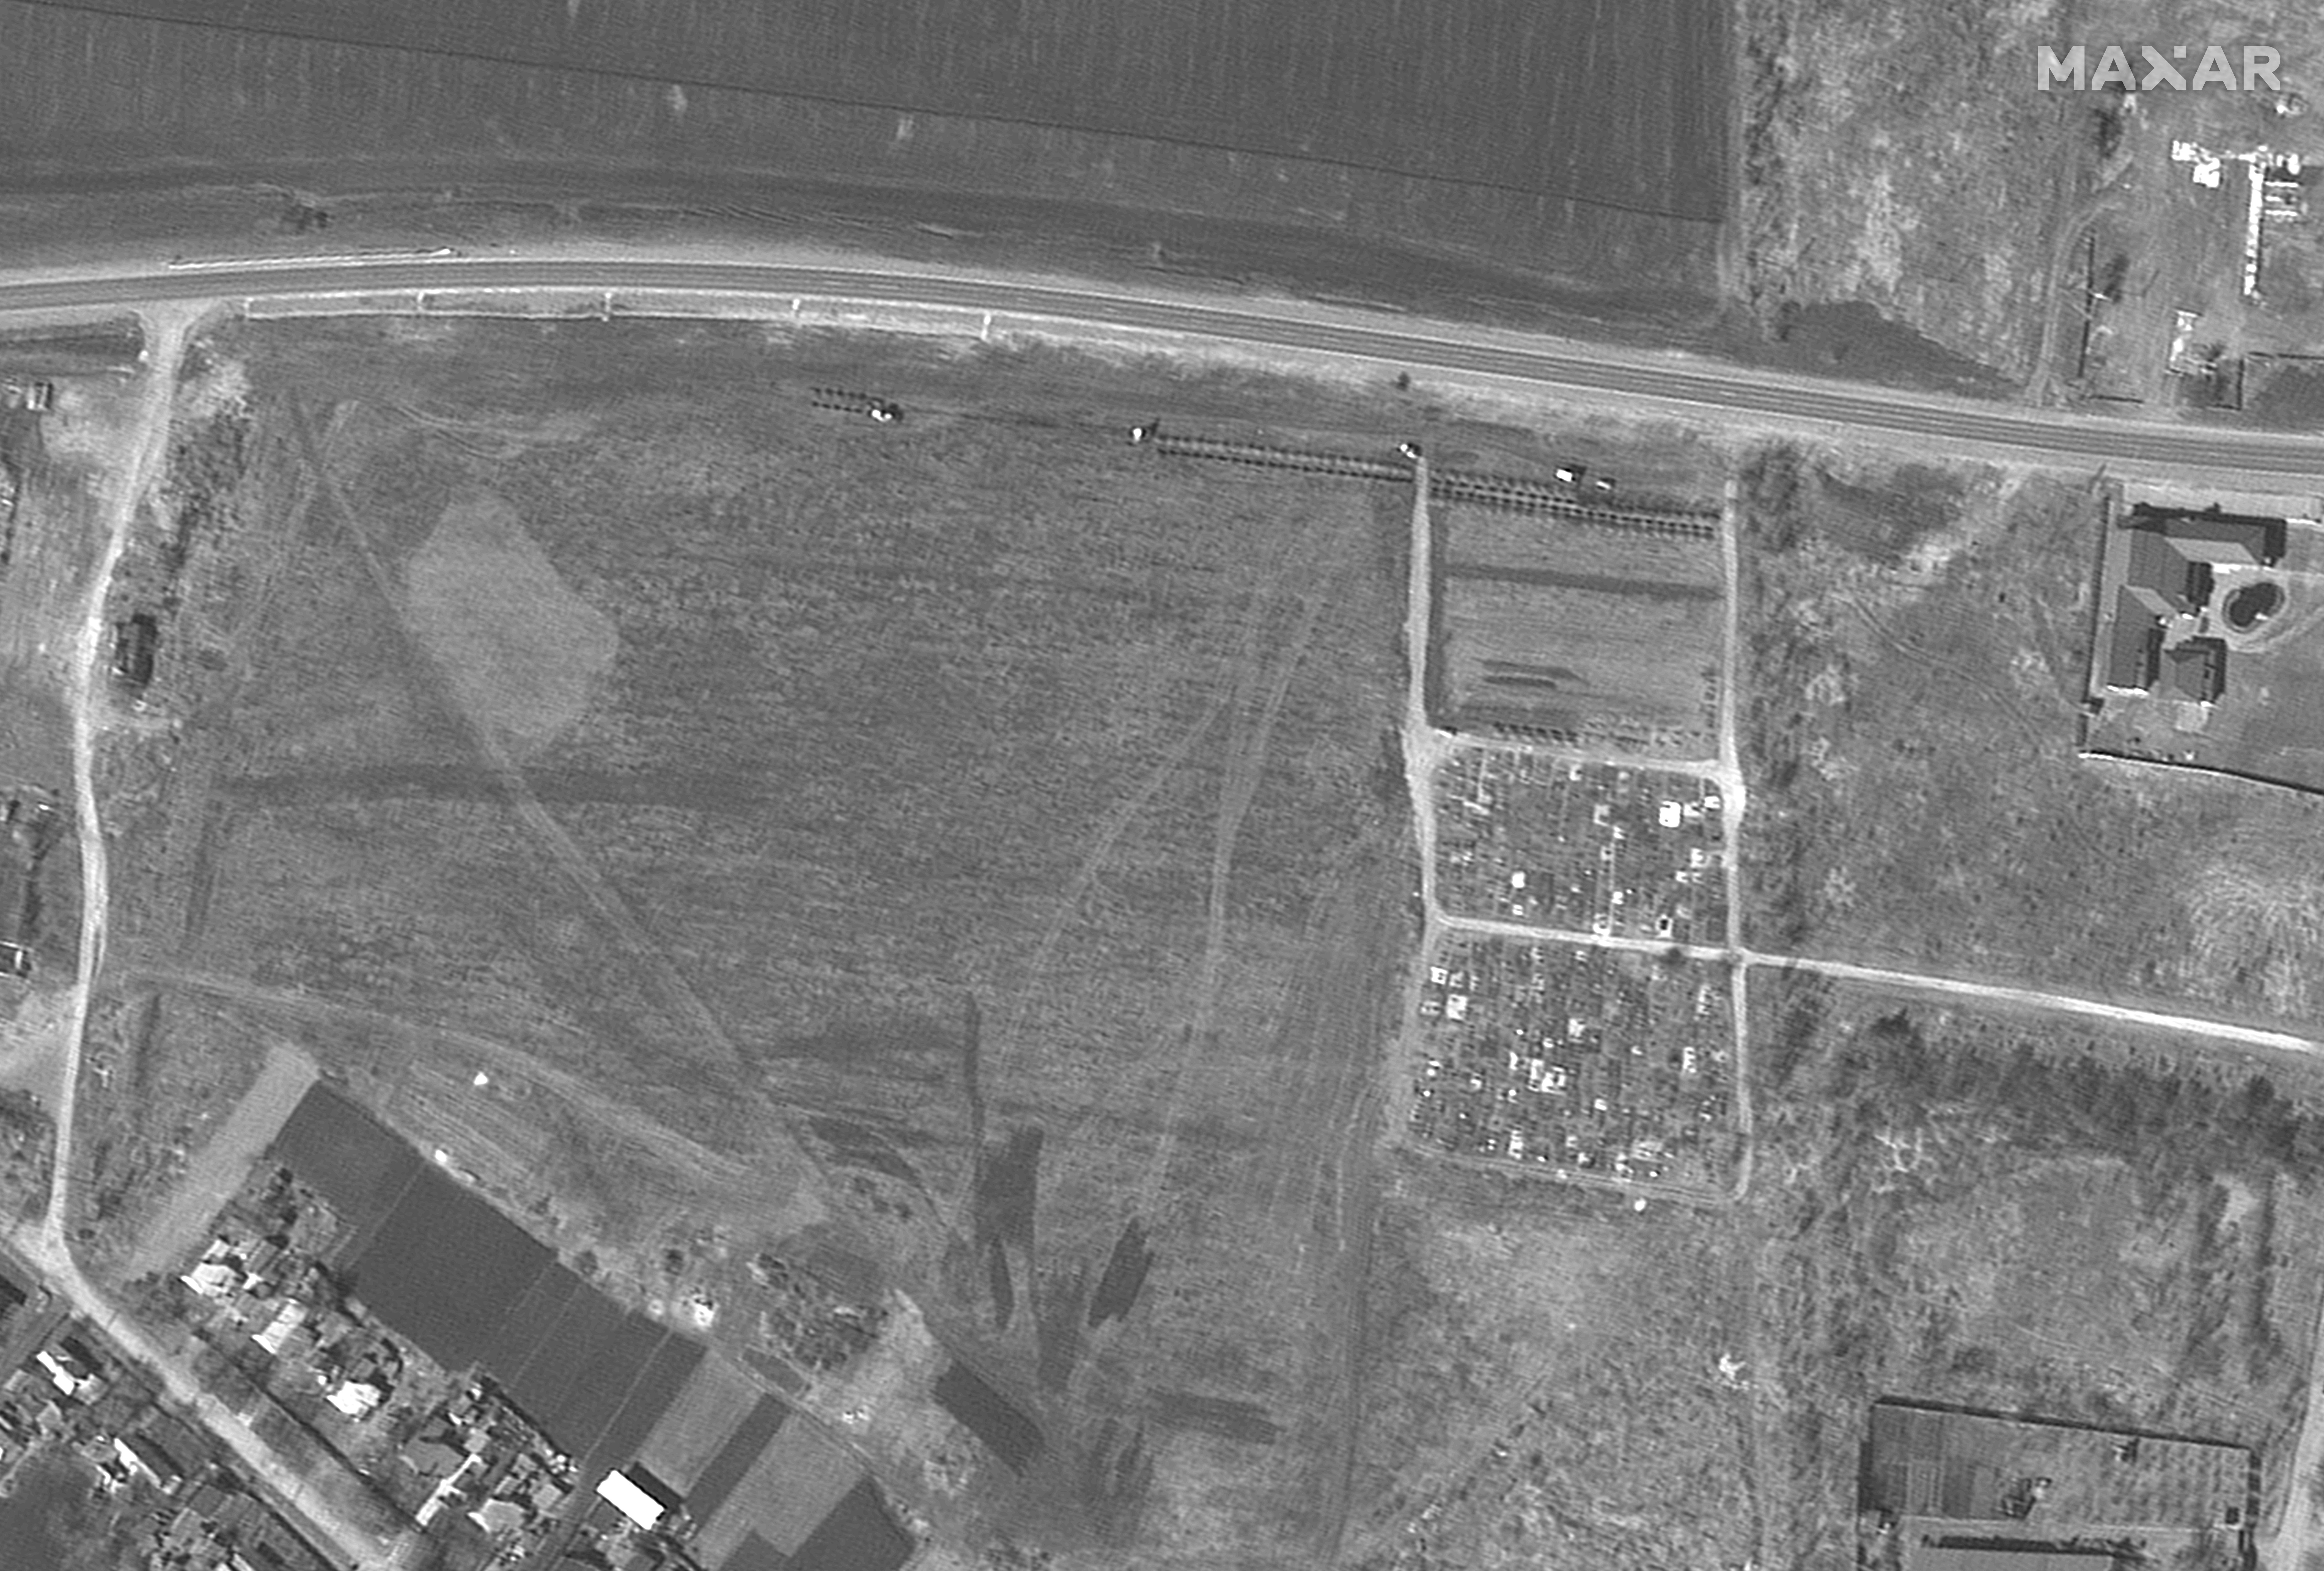 Another satellite image captured on March 26 showing the cemetery with a line of newly dug graves.